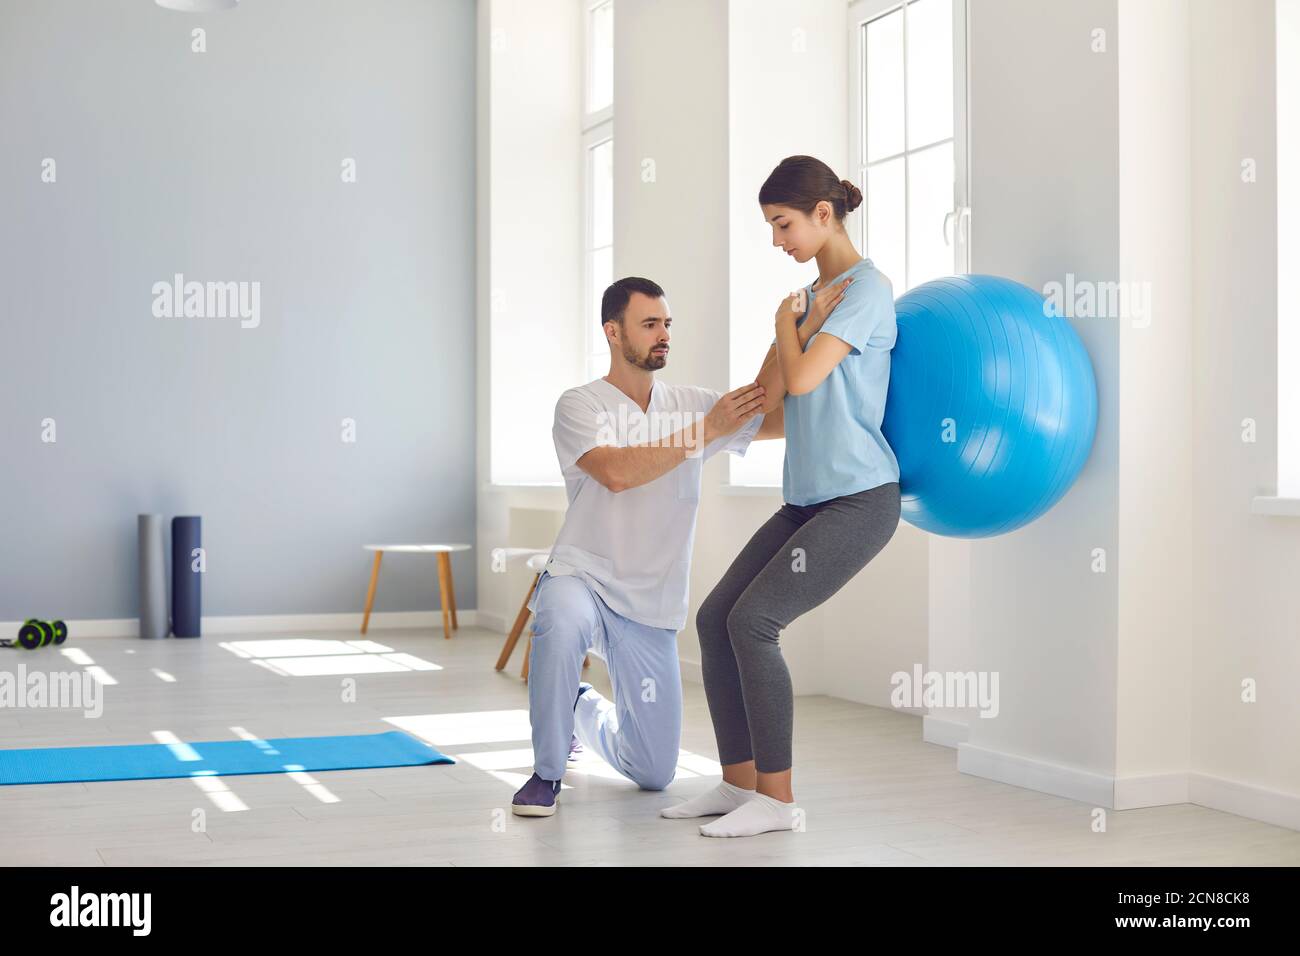 Physiotherapist helping young woman recover from back injury using big soft ball Stock Photo